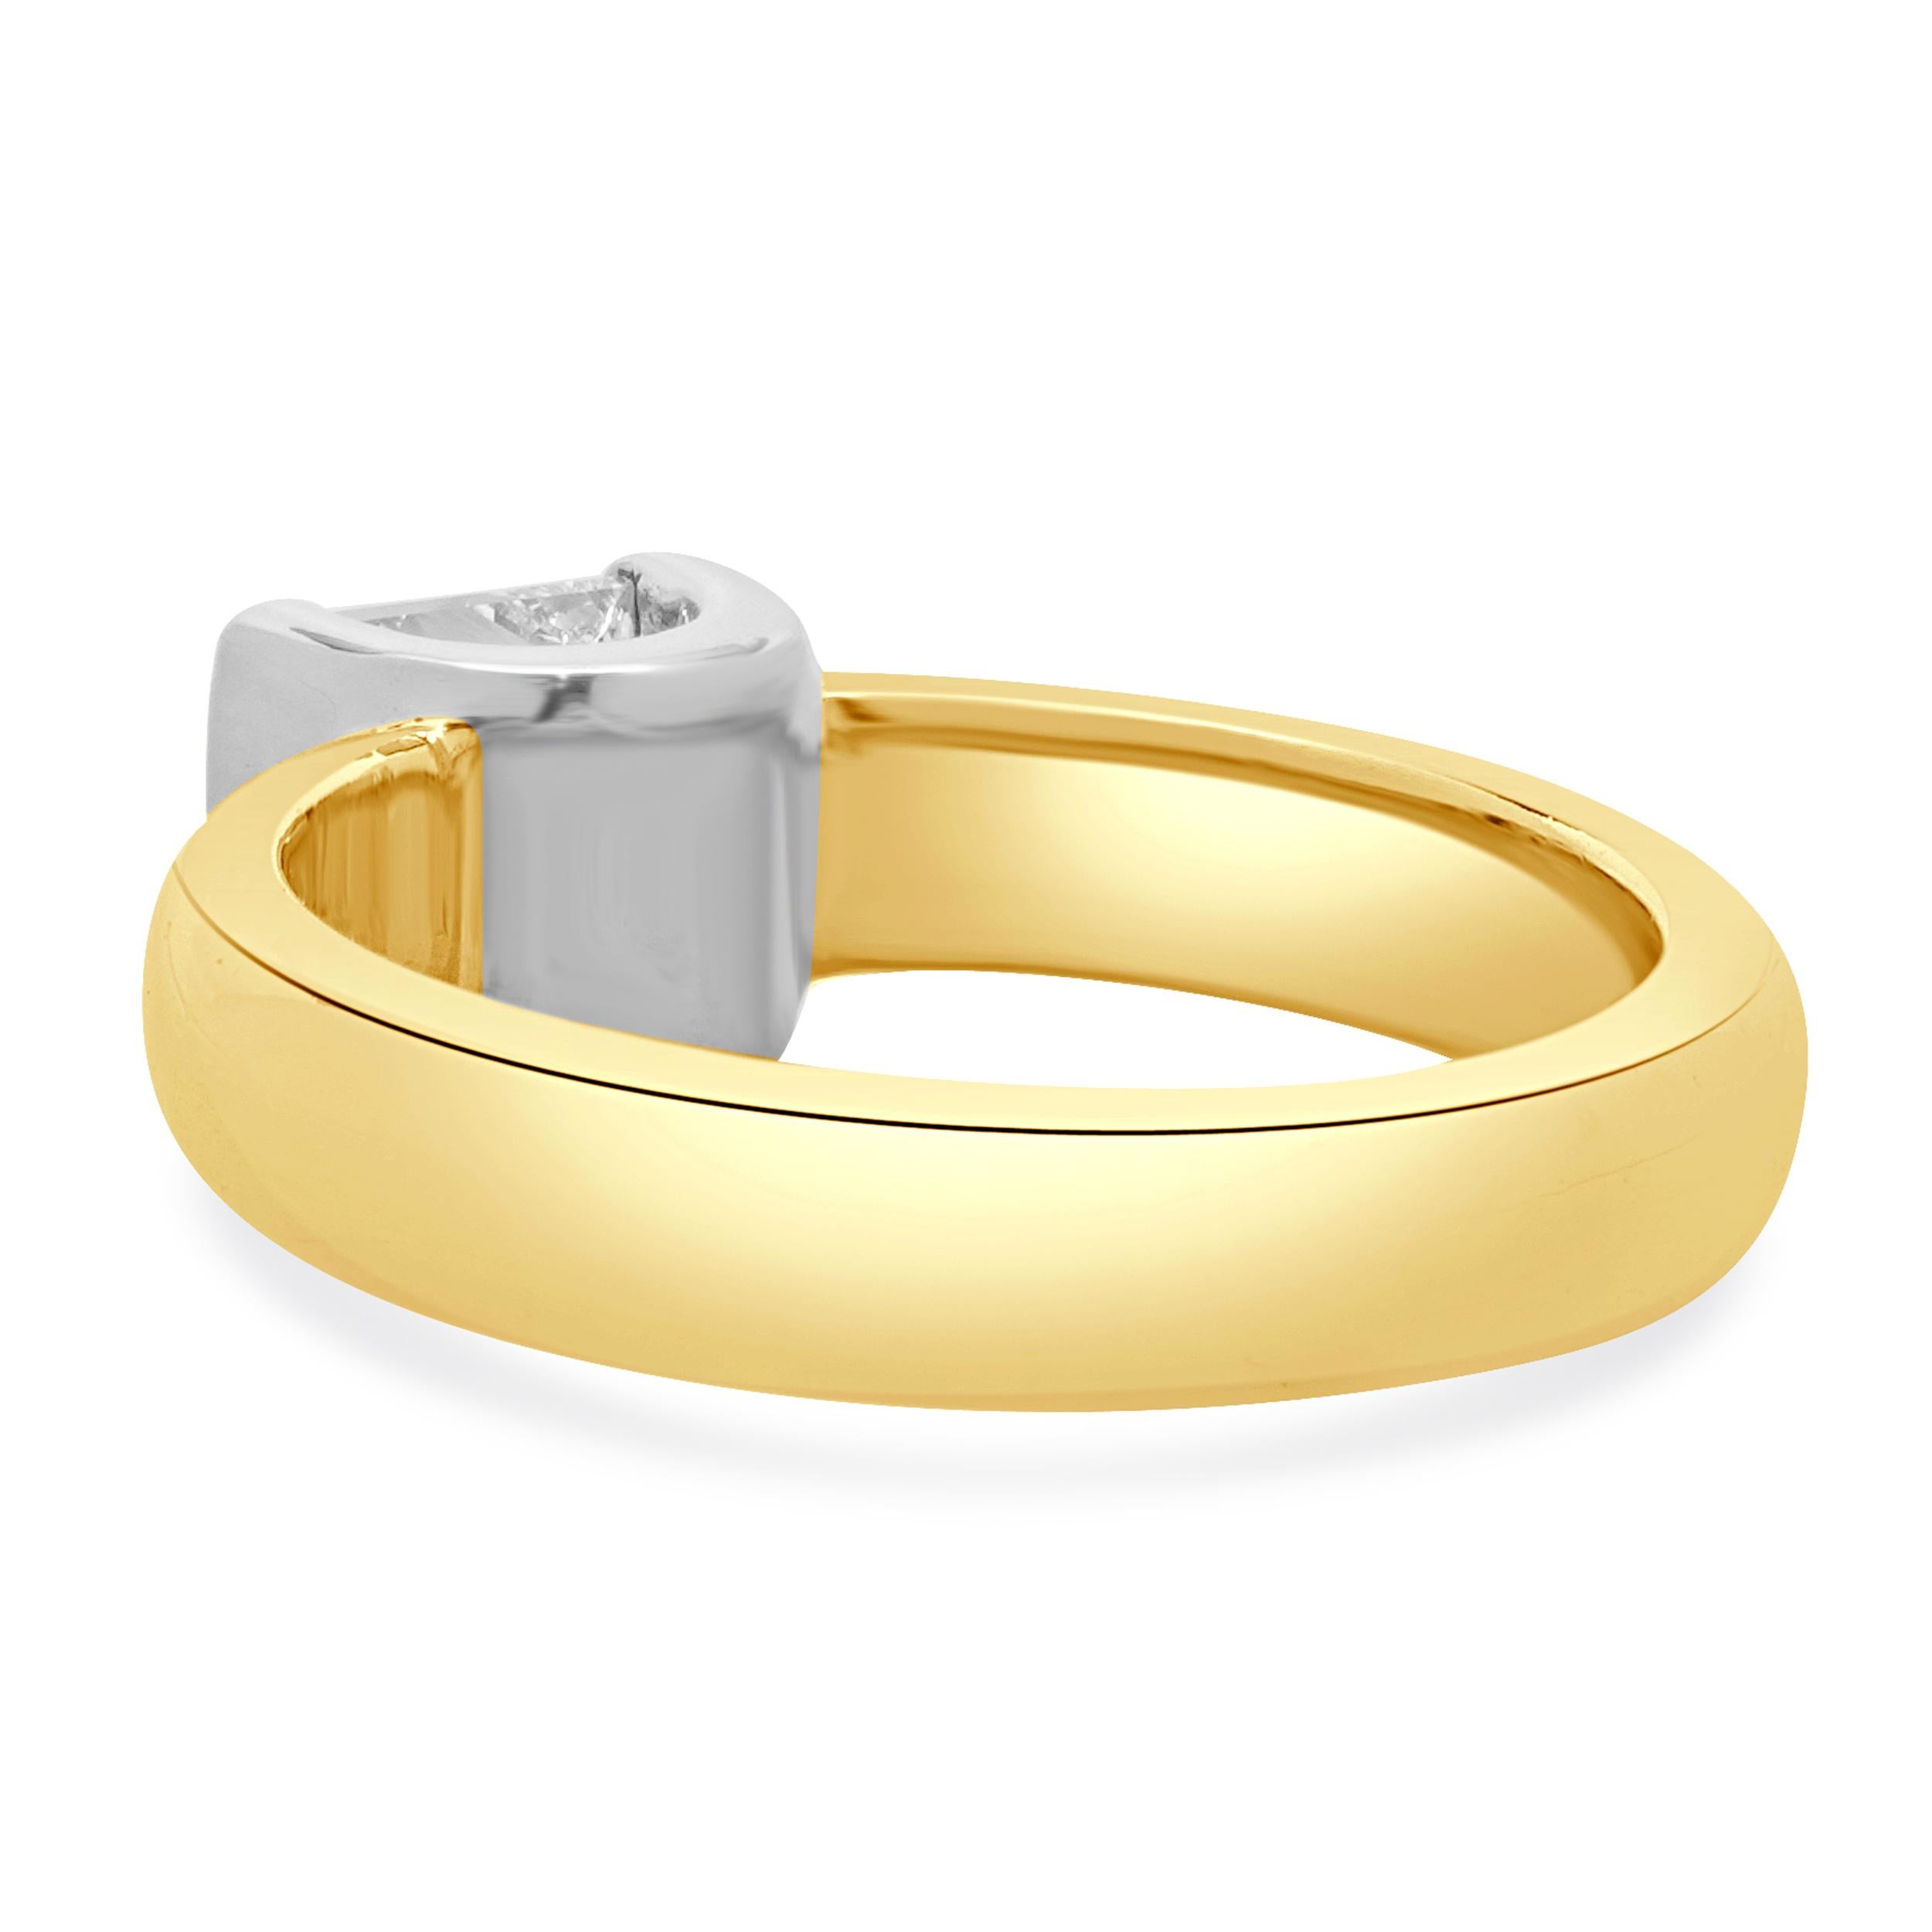 14 Karat Yellow Gold Princess Cut Diamond Engagement Ring In Excellent Condition For Sale In Scottsdale, AZ